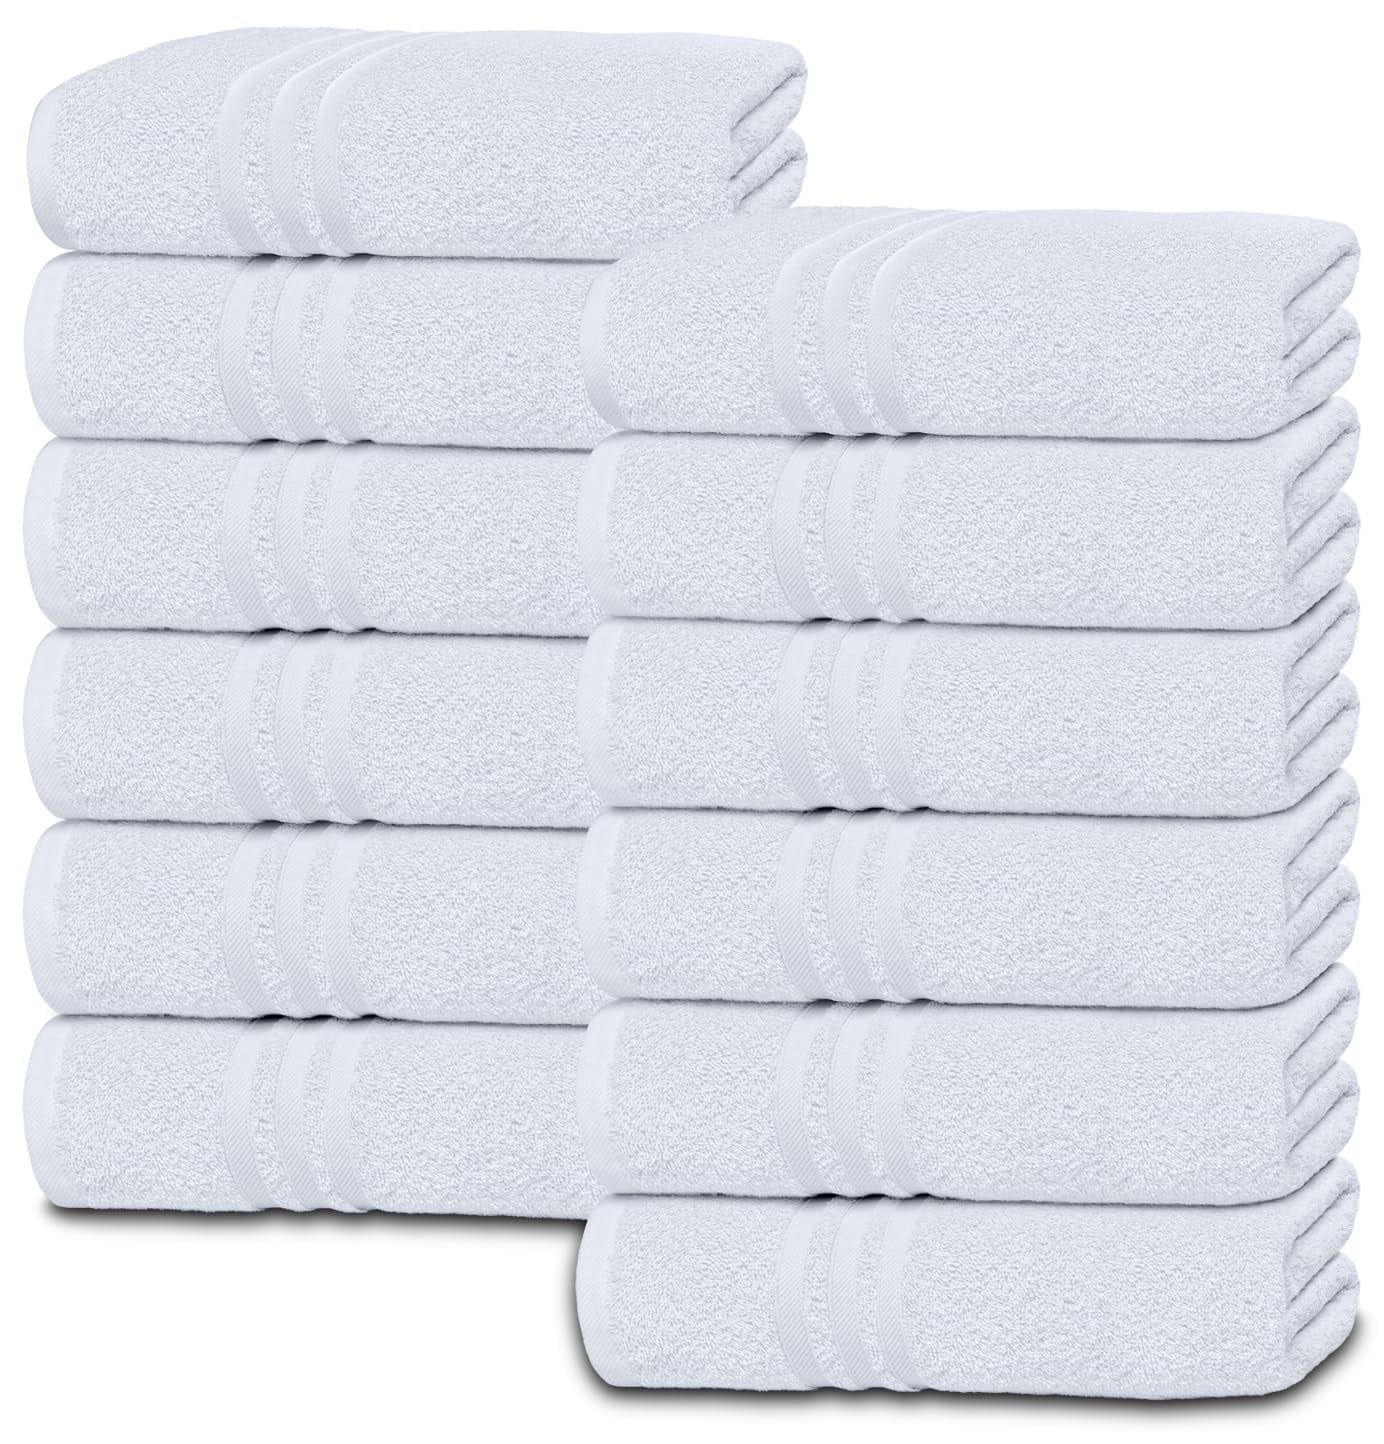 White Classic Hand Towels White Wealuxe Collection Hand Towels, 100% Cotton Soft and Lightweight ... | Walmart (US)